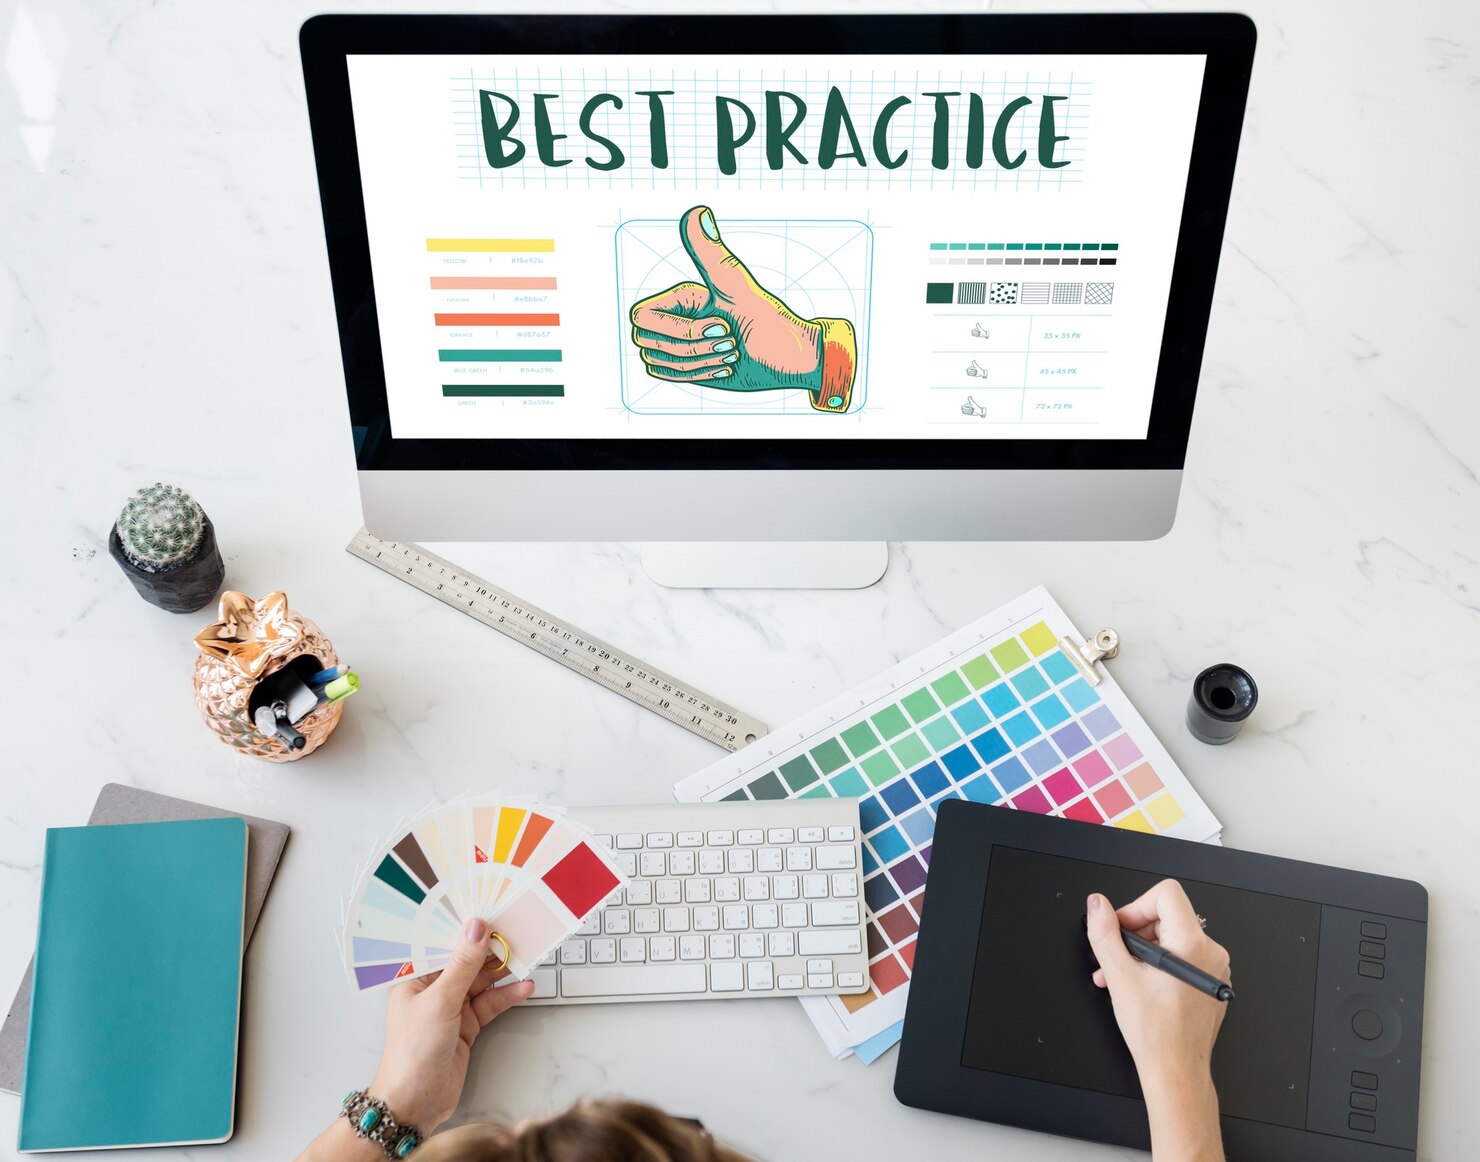 best practice thumbs up approval concept 53876 132655